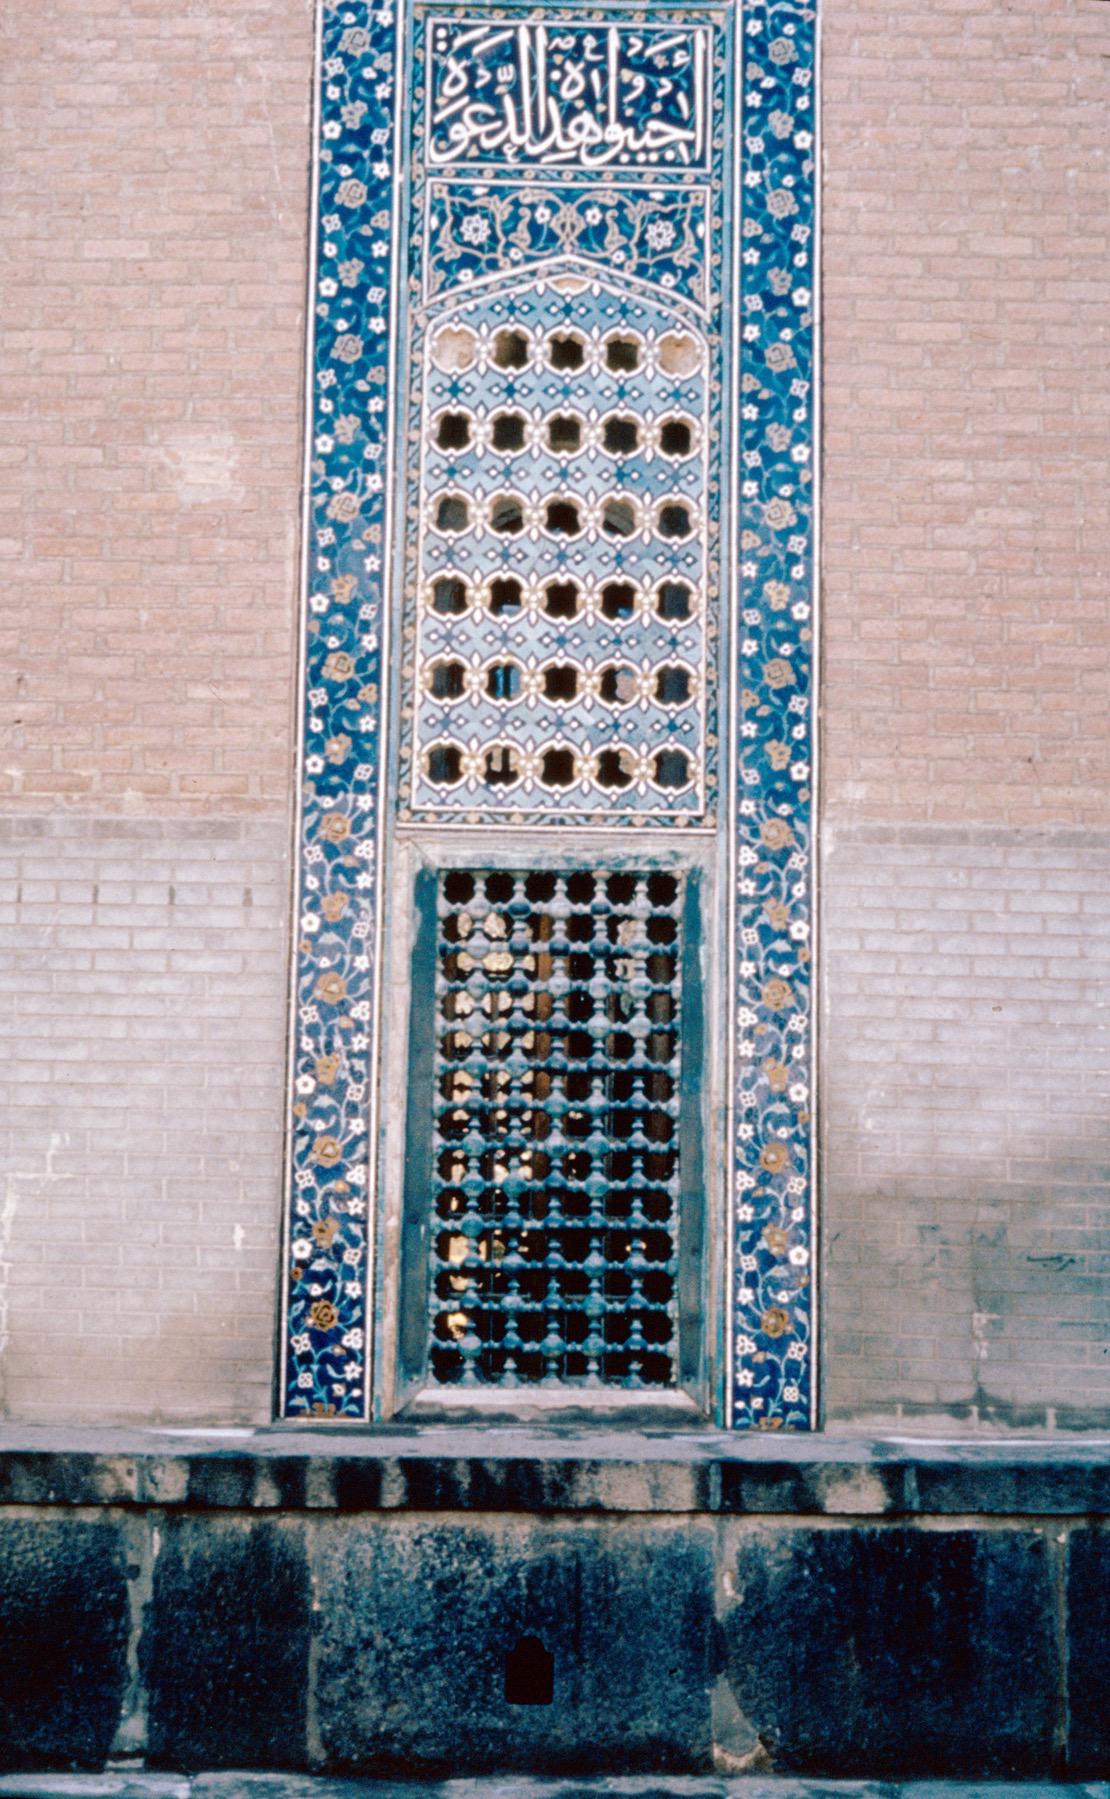 Exterior detail view of the courtyard wall of Dar al-Huffaz, showing screened window framed by tile mosaic band with floral motifs on a dark blue ground